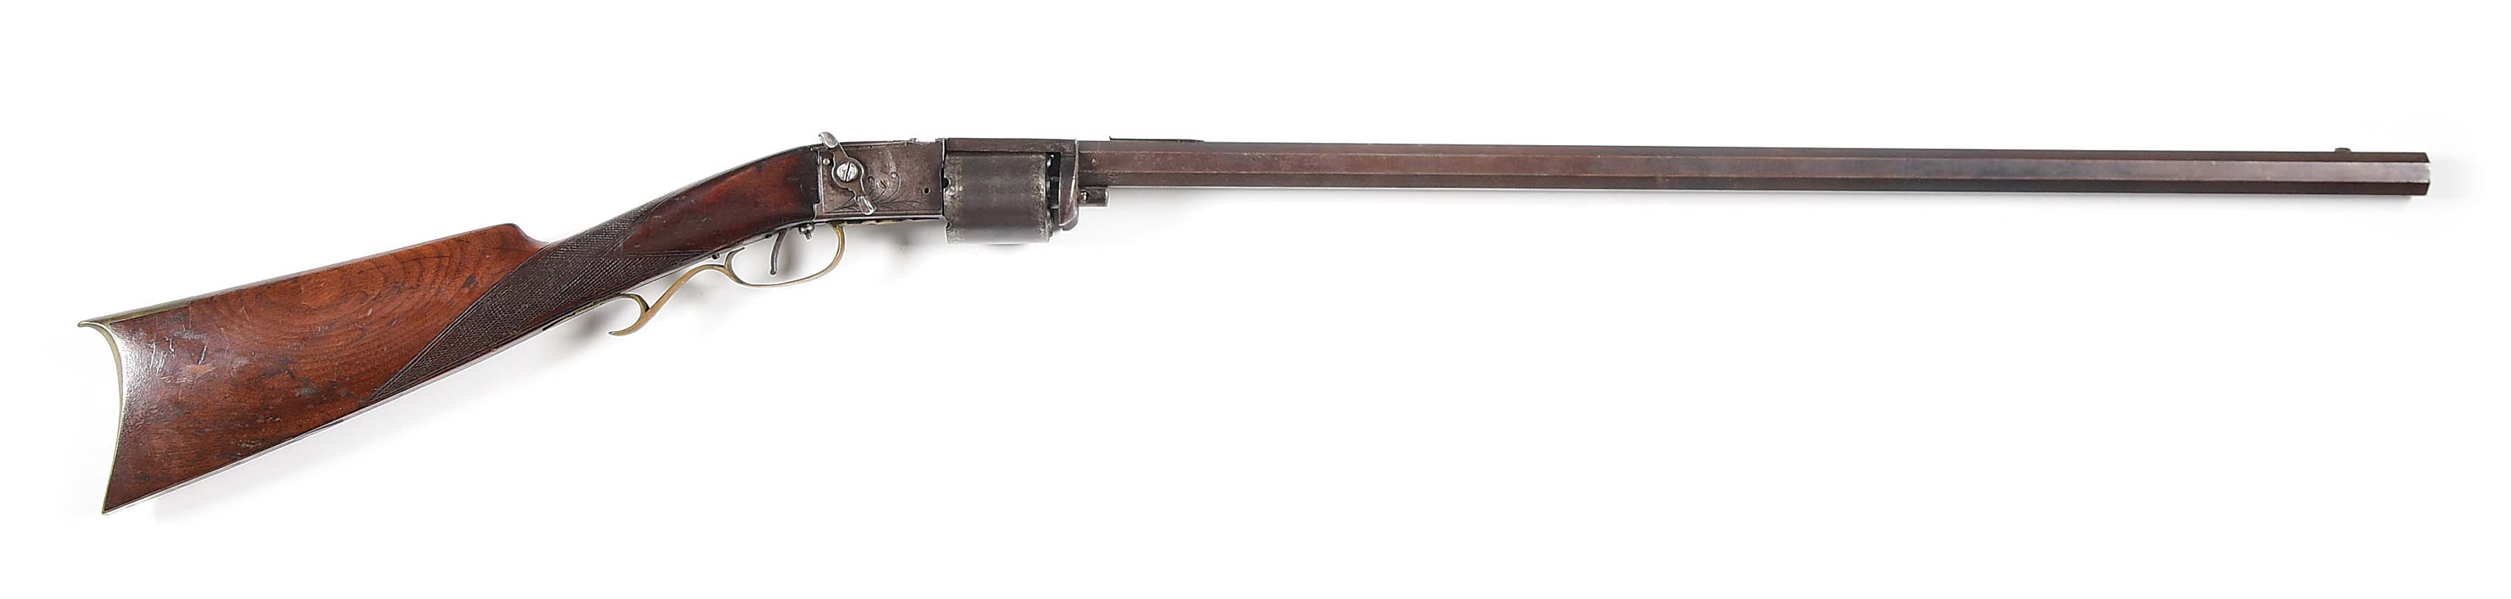 (A) UNUSUAL UNMARKED CIRCA 1840S HAMMERLESS REVOLVING RIFLE.